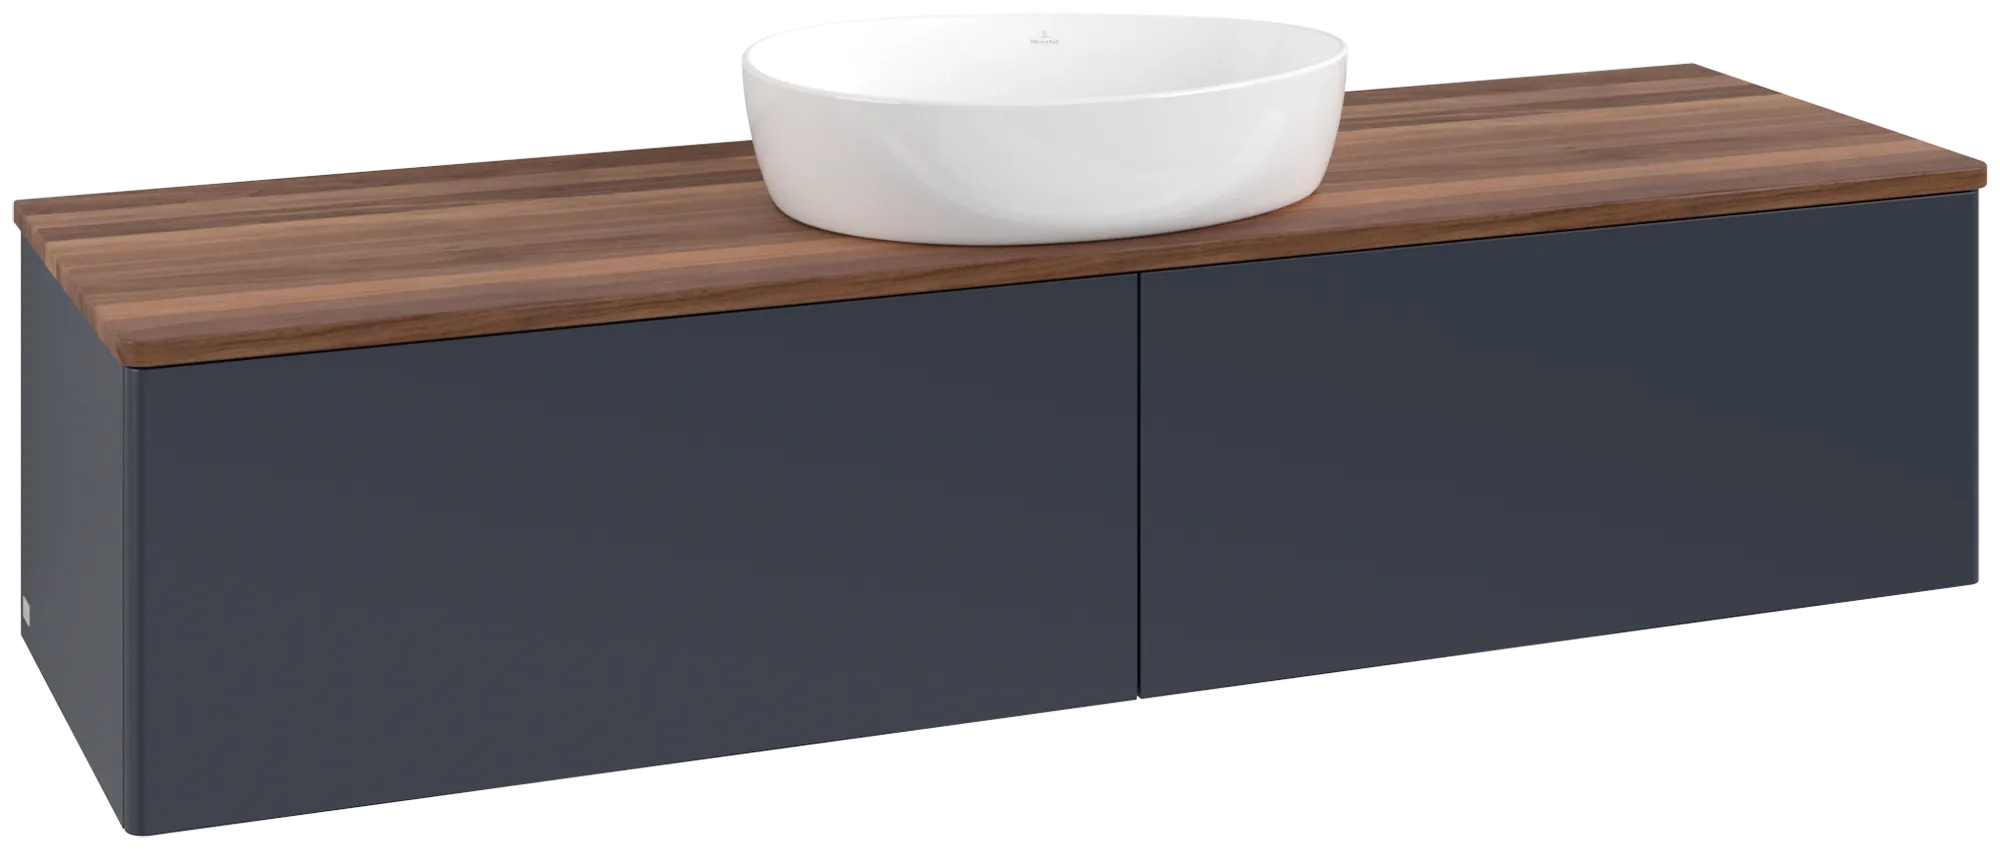 Picture of VILLEROY BOCH Antao Vanity unit, with lighting, 2 pull-out compartments, 1600 x 360 x 500 mm, Front without structure, Midnight Blue Matt Lacquer / Warm Walnut #L36012HG